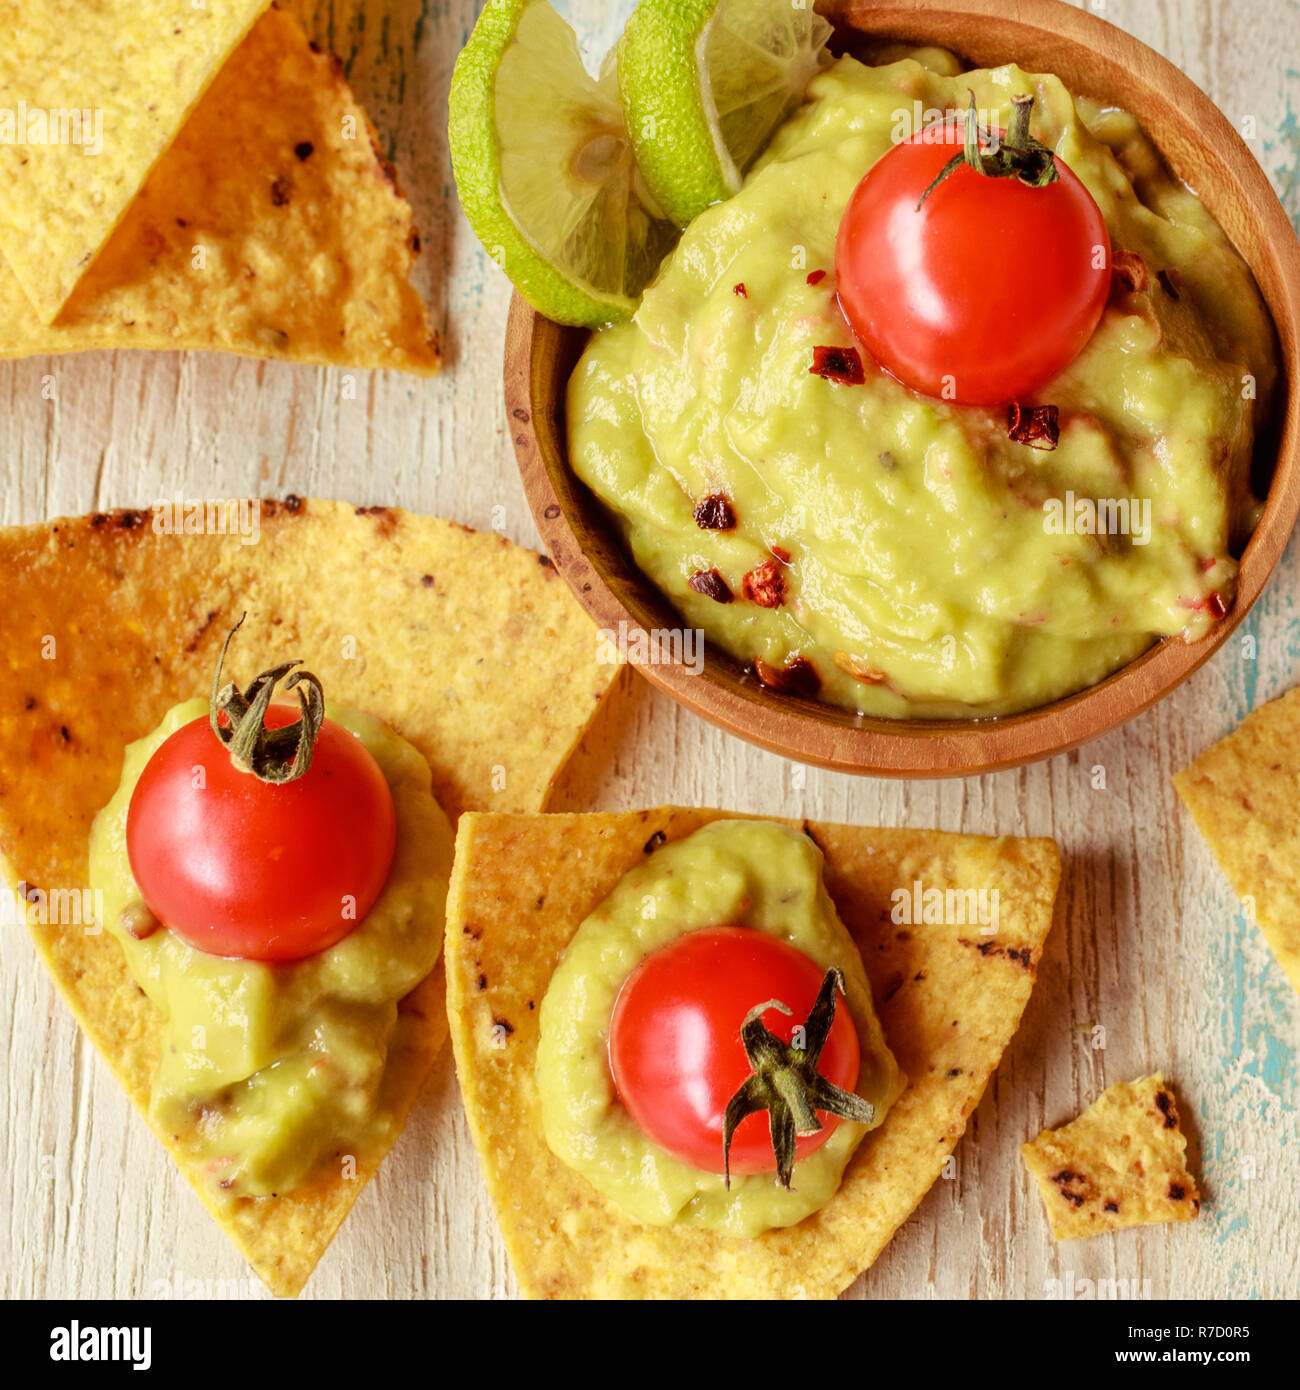 Corn chips nachos and guacamole in a wooden bowl decorated with cherry tomatoes and lime slices on a wooden white washed table. Stock Photo